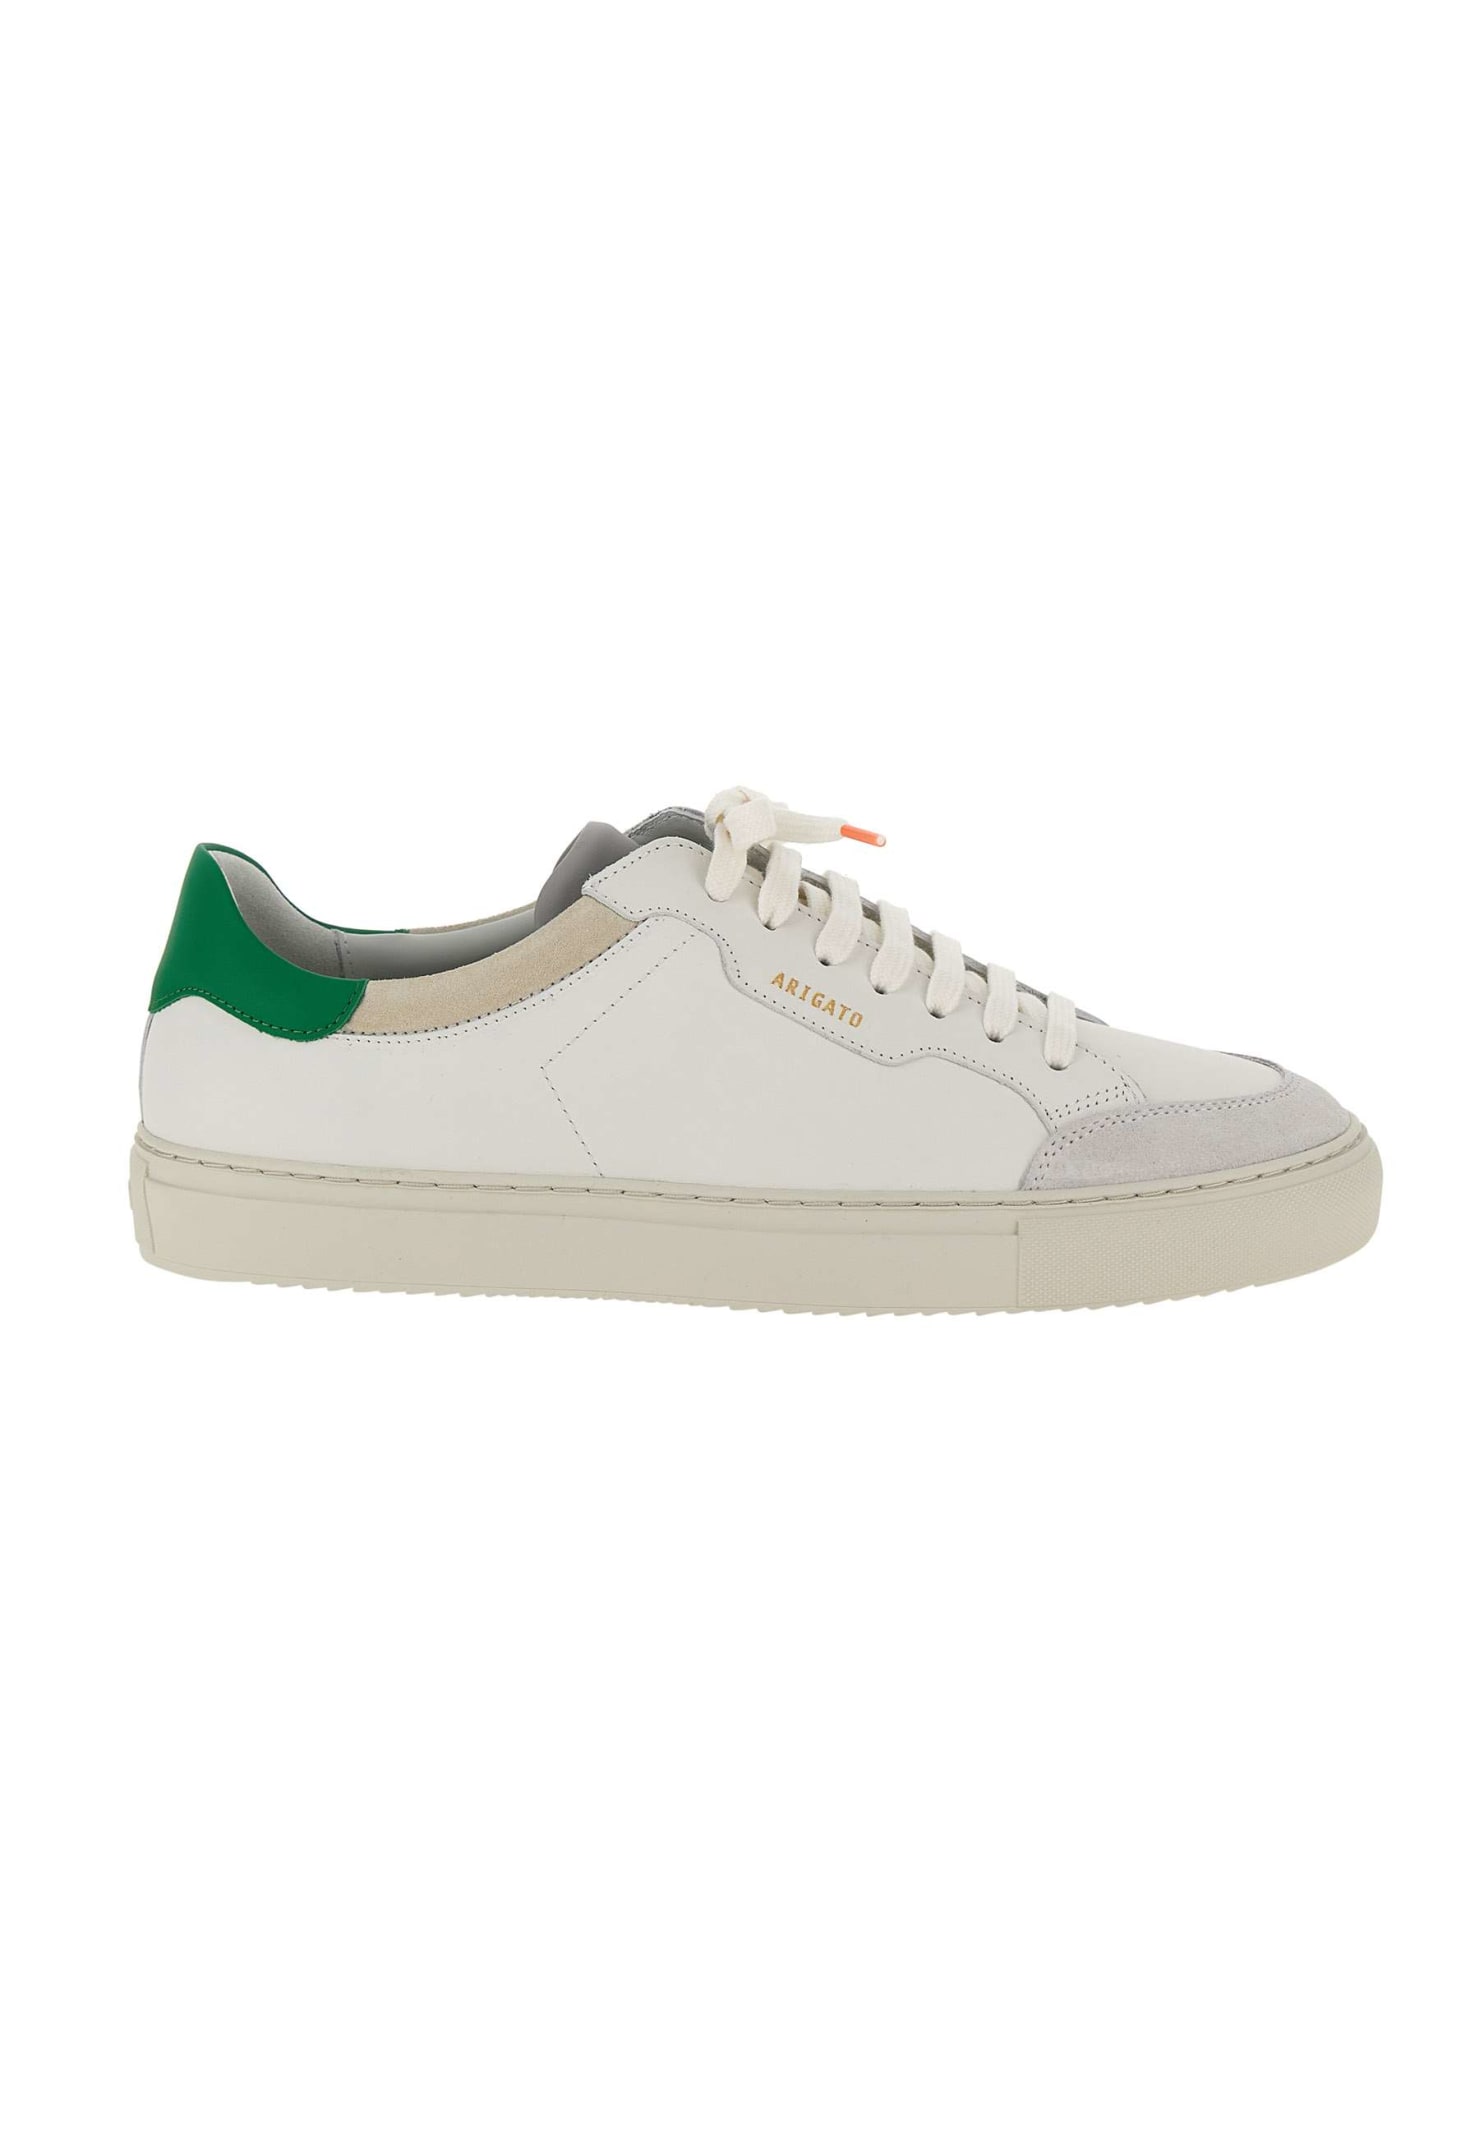 Axel Arigato clean Remix Leather Sneakers